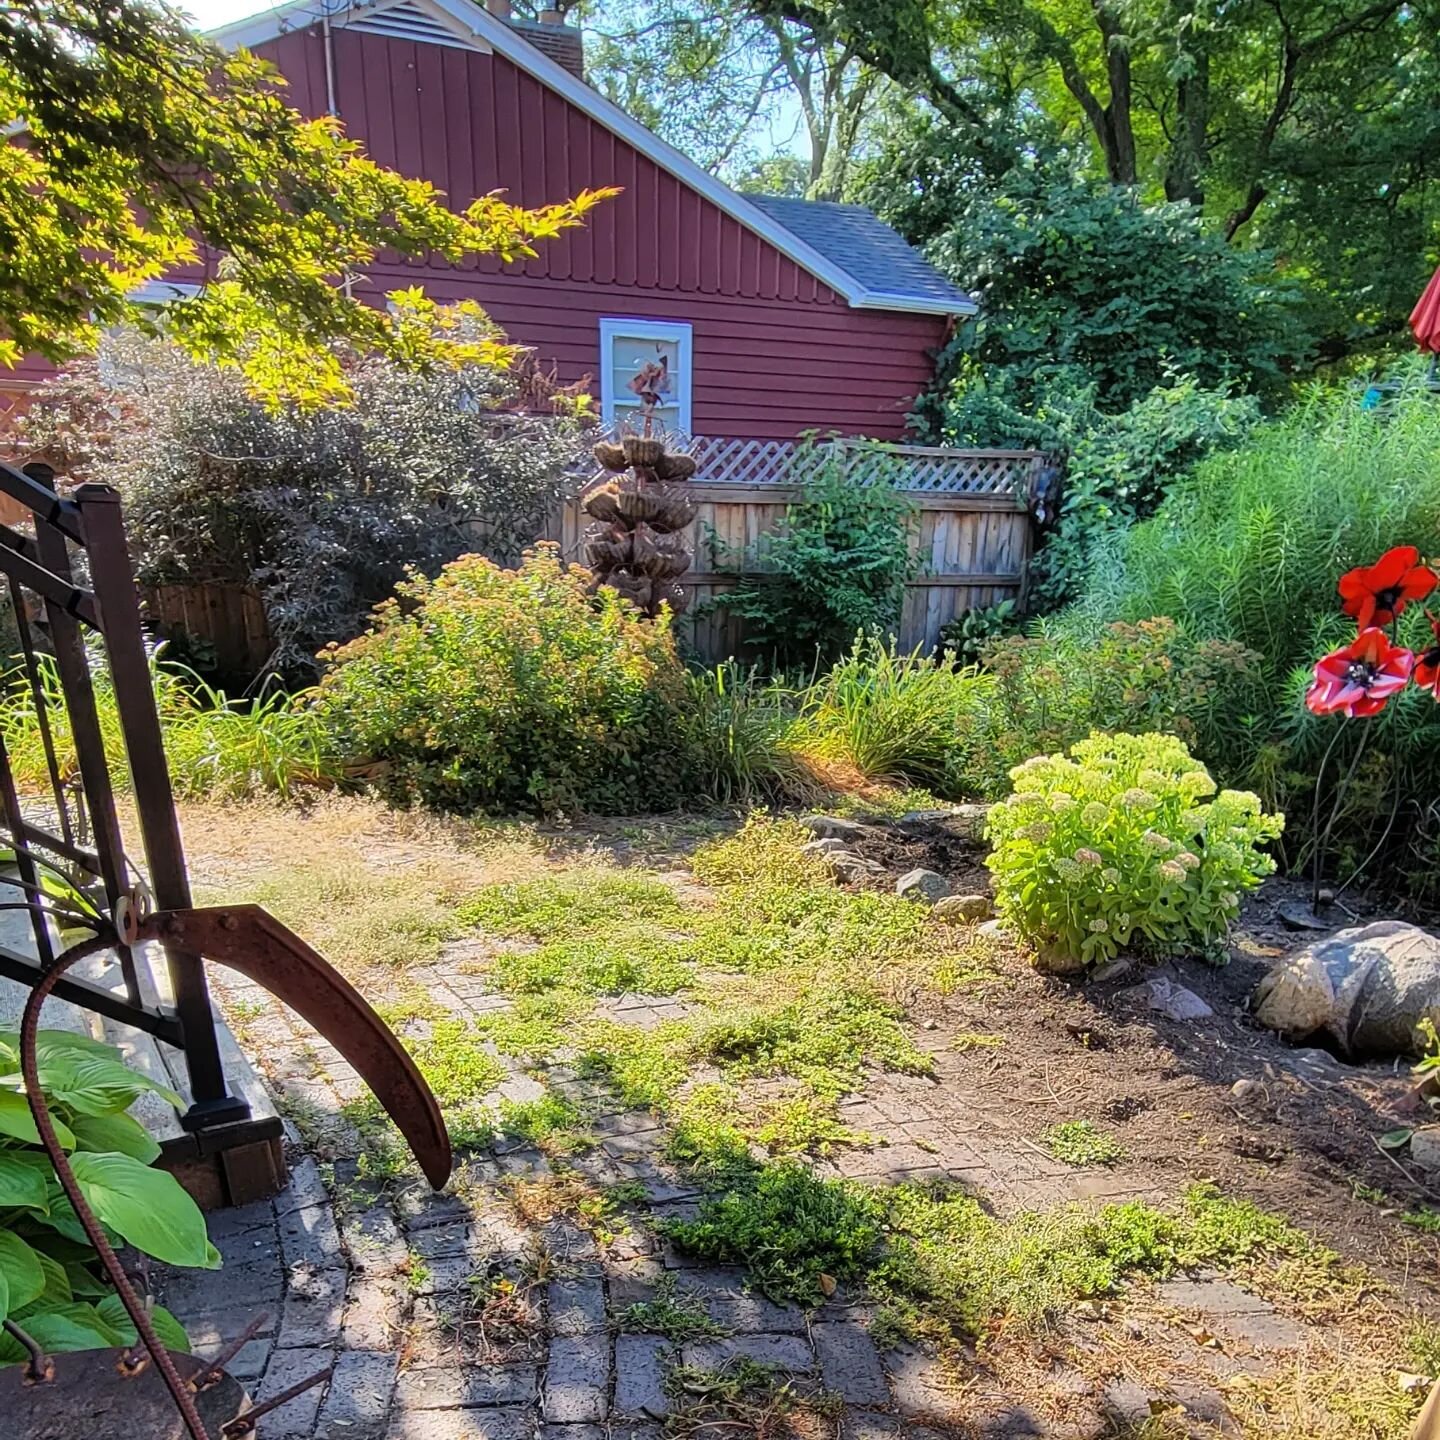 The Sunshine crew has been working hard, even in the heat, to get gardens back to their awesomeness. Check out these dramatic before and after photos! We treat your yard as if it was our own, taking care of precious perennials and making everything l